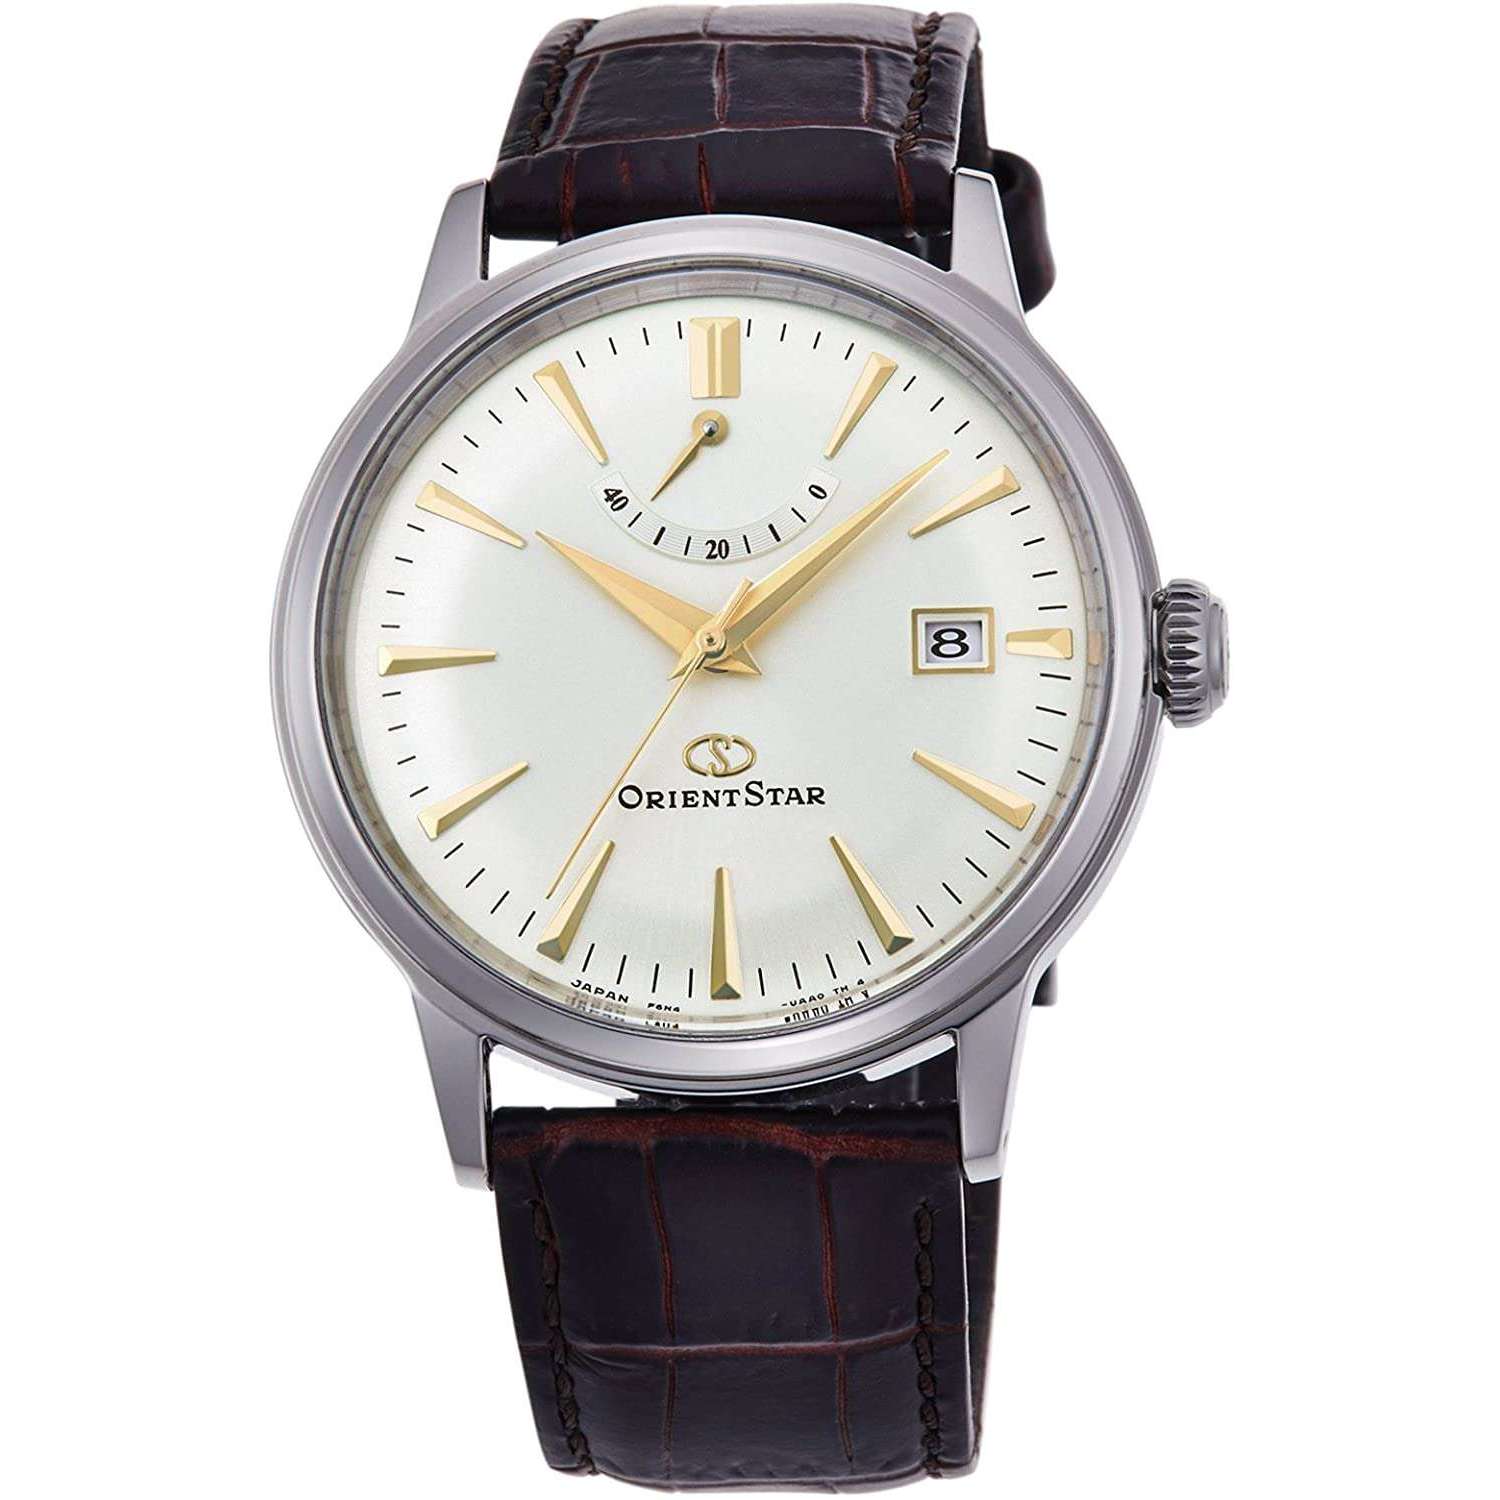 ORIENT STAR CLASSIC COLLECTION ELEGANT CLASSIC/CLASSIC MEN WATCH RK-AF0003S - ROOK JAPAN